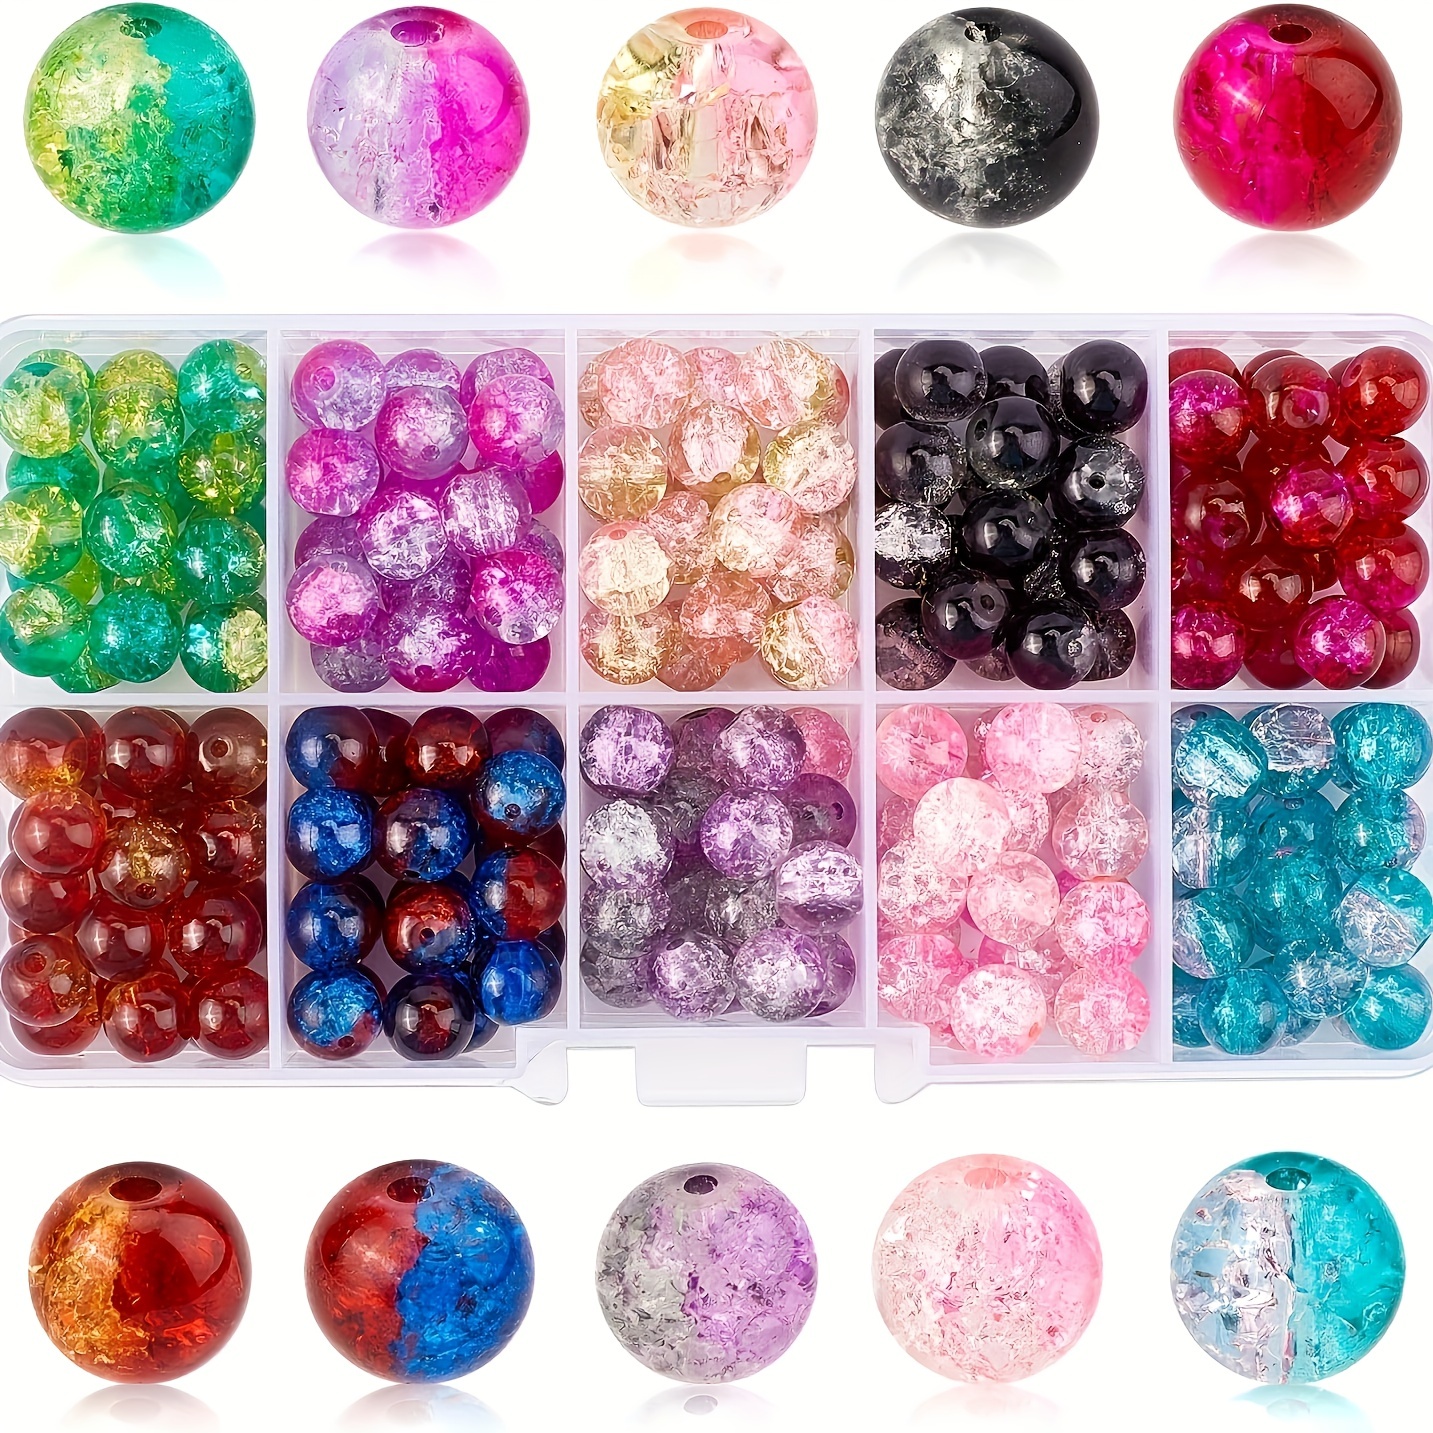 Crackle Lampwork Glass Round Beads in Bulk for Bracelets